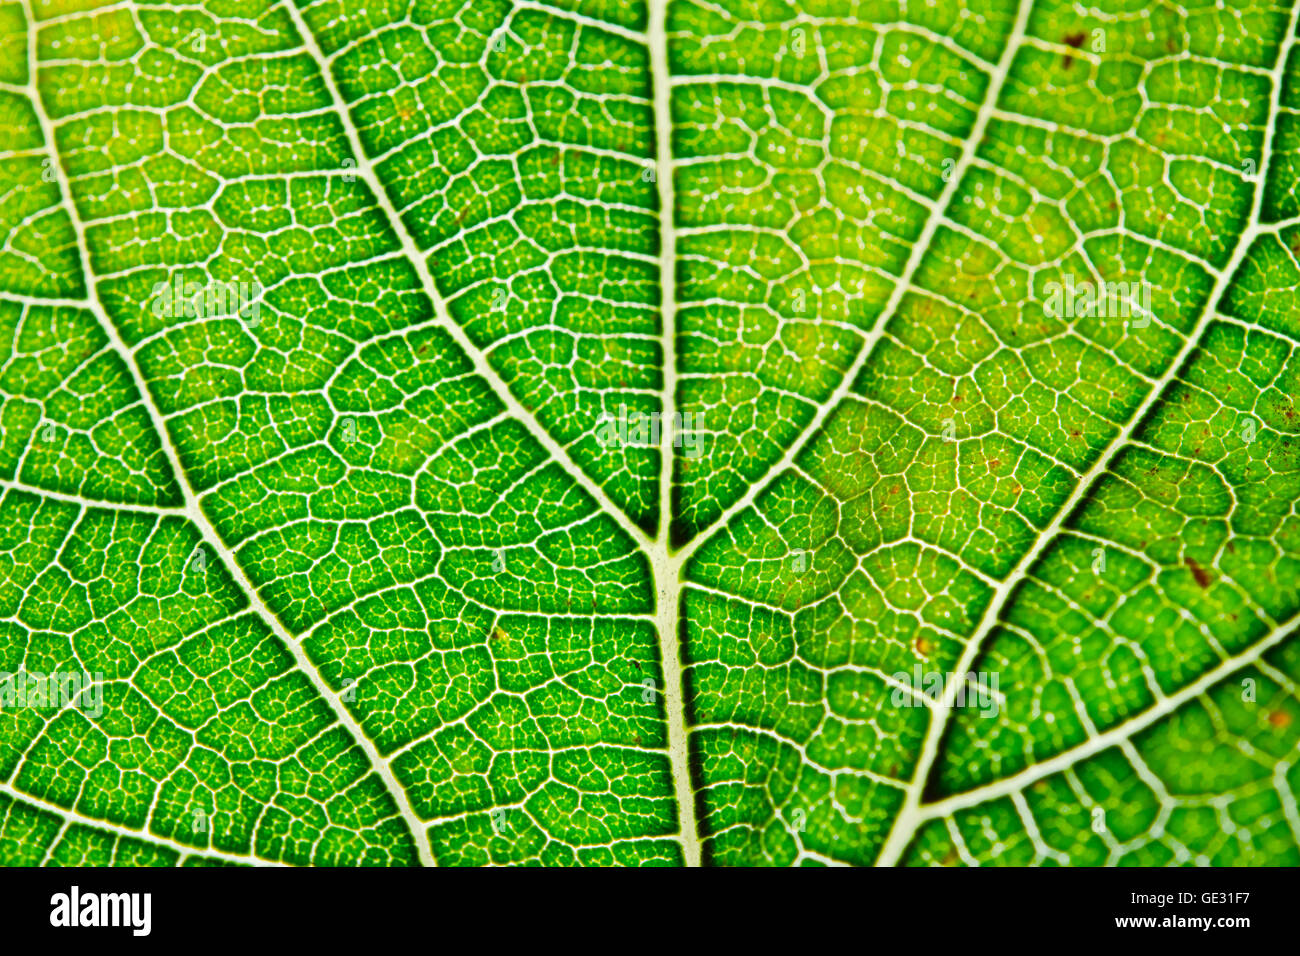 Texture of green leaf and veins Stock Photo